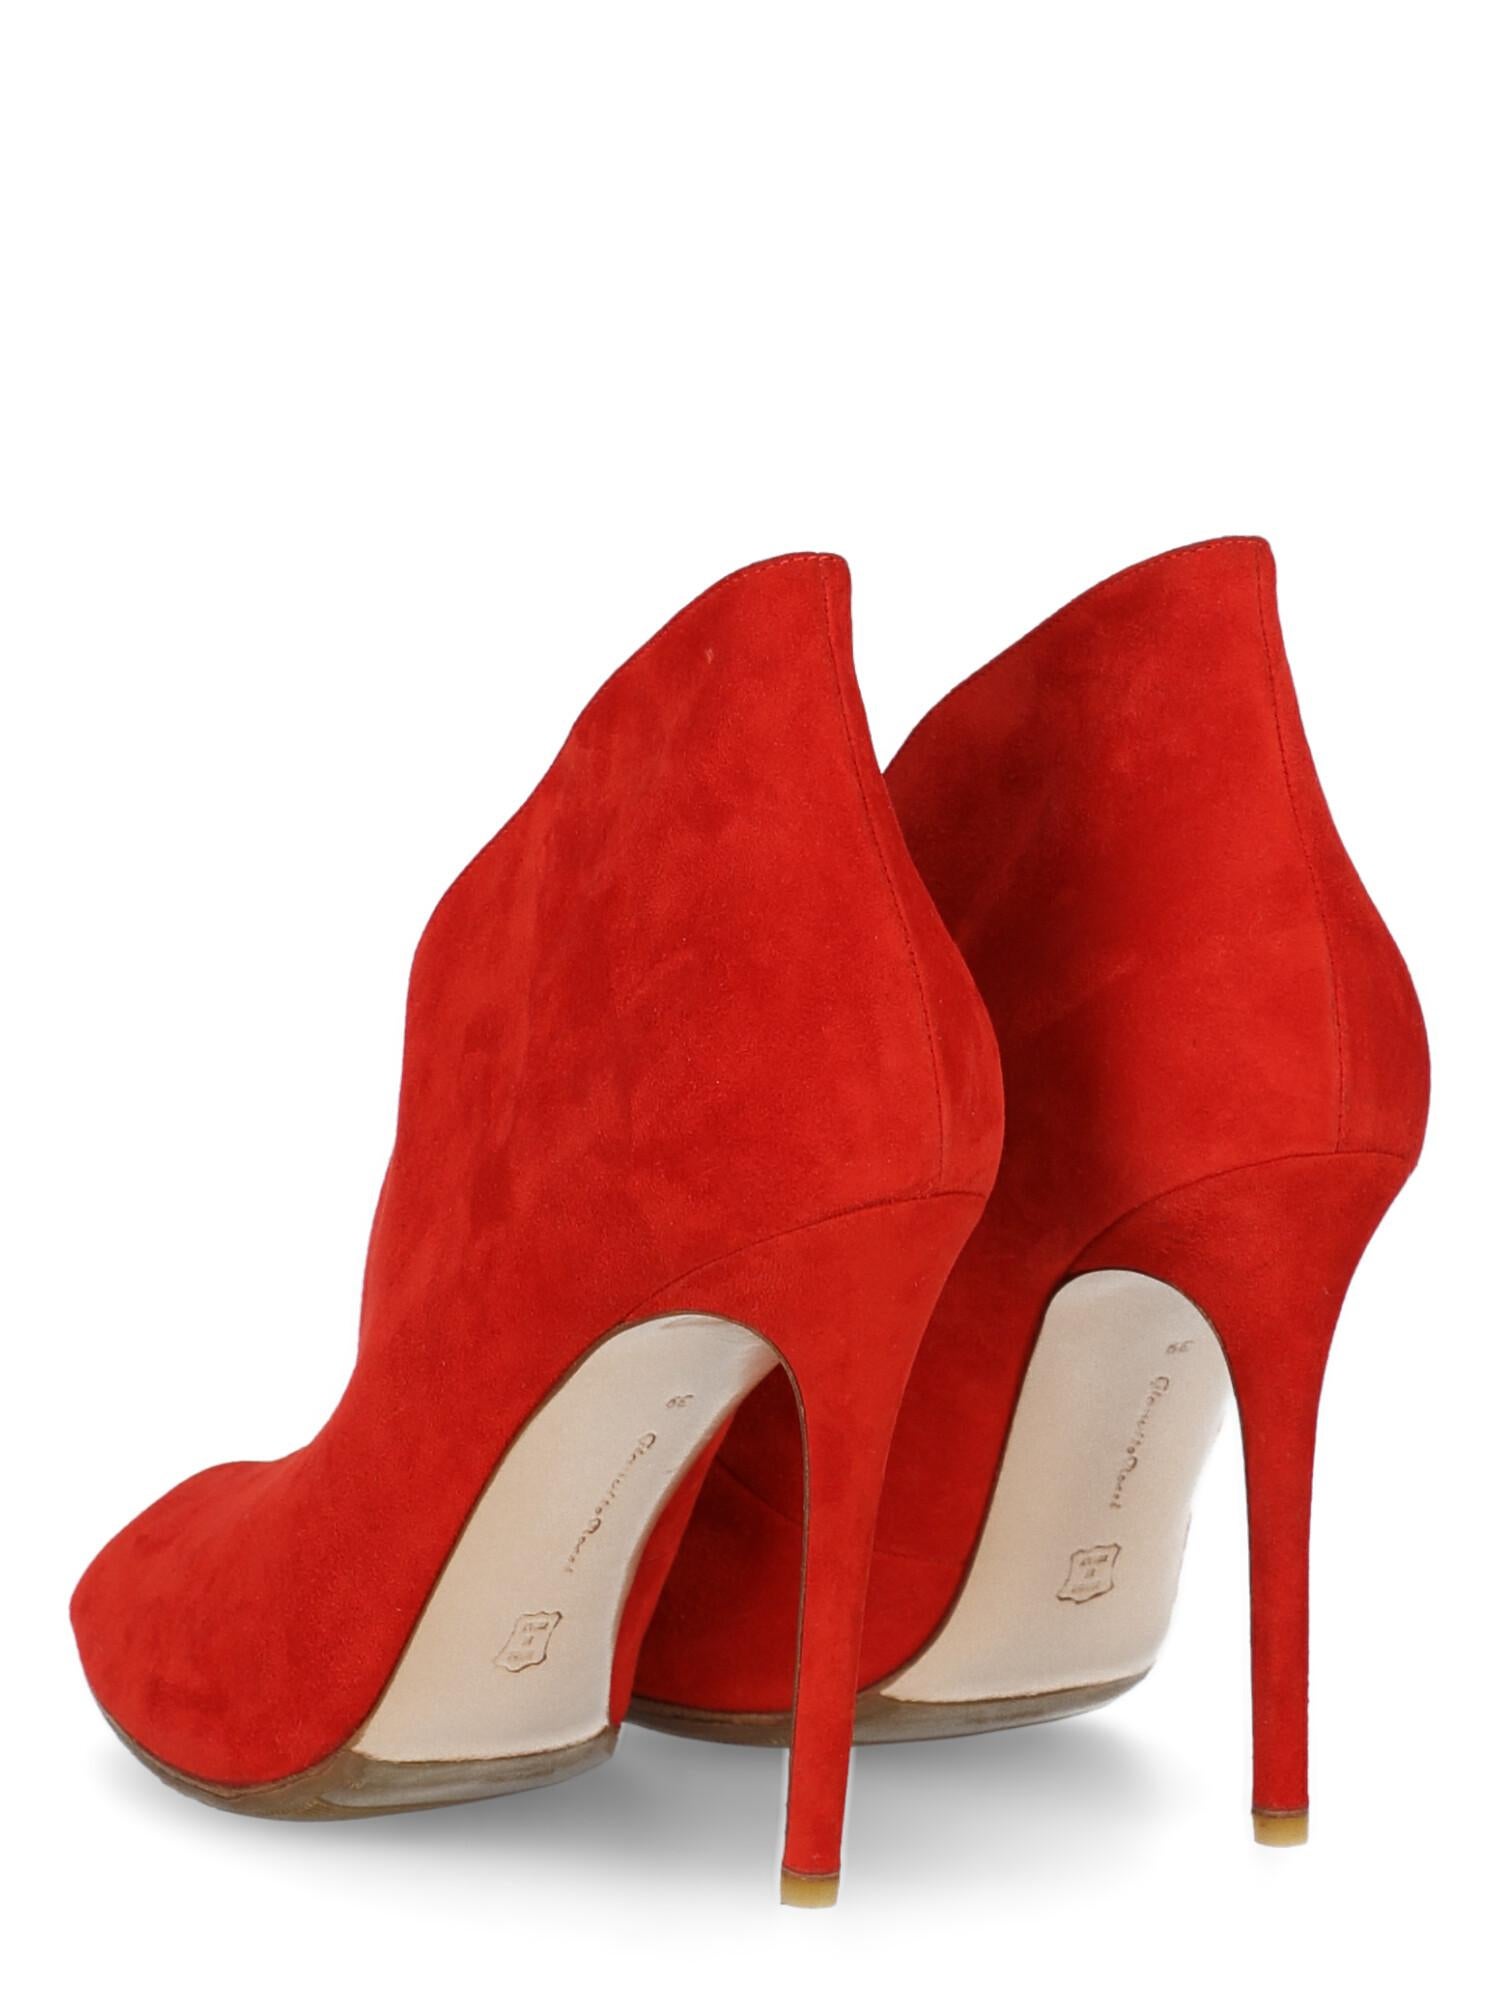 Gianvito Rossi  Women   Pumps  Red Leather EU 39 In Good Condition For Sale In Milan, IT